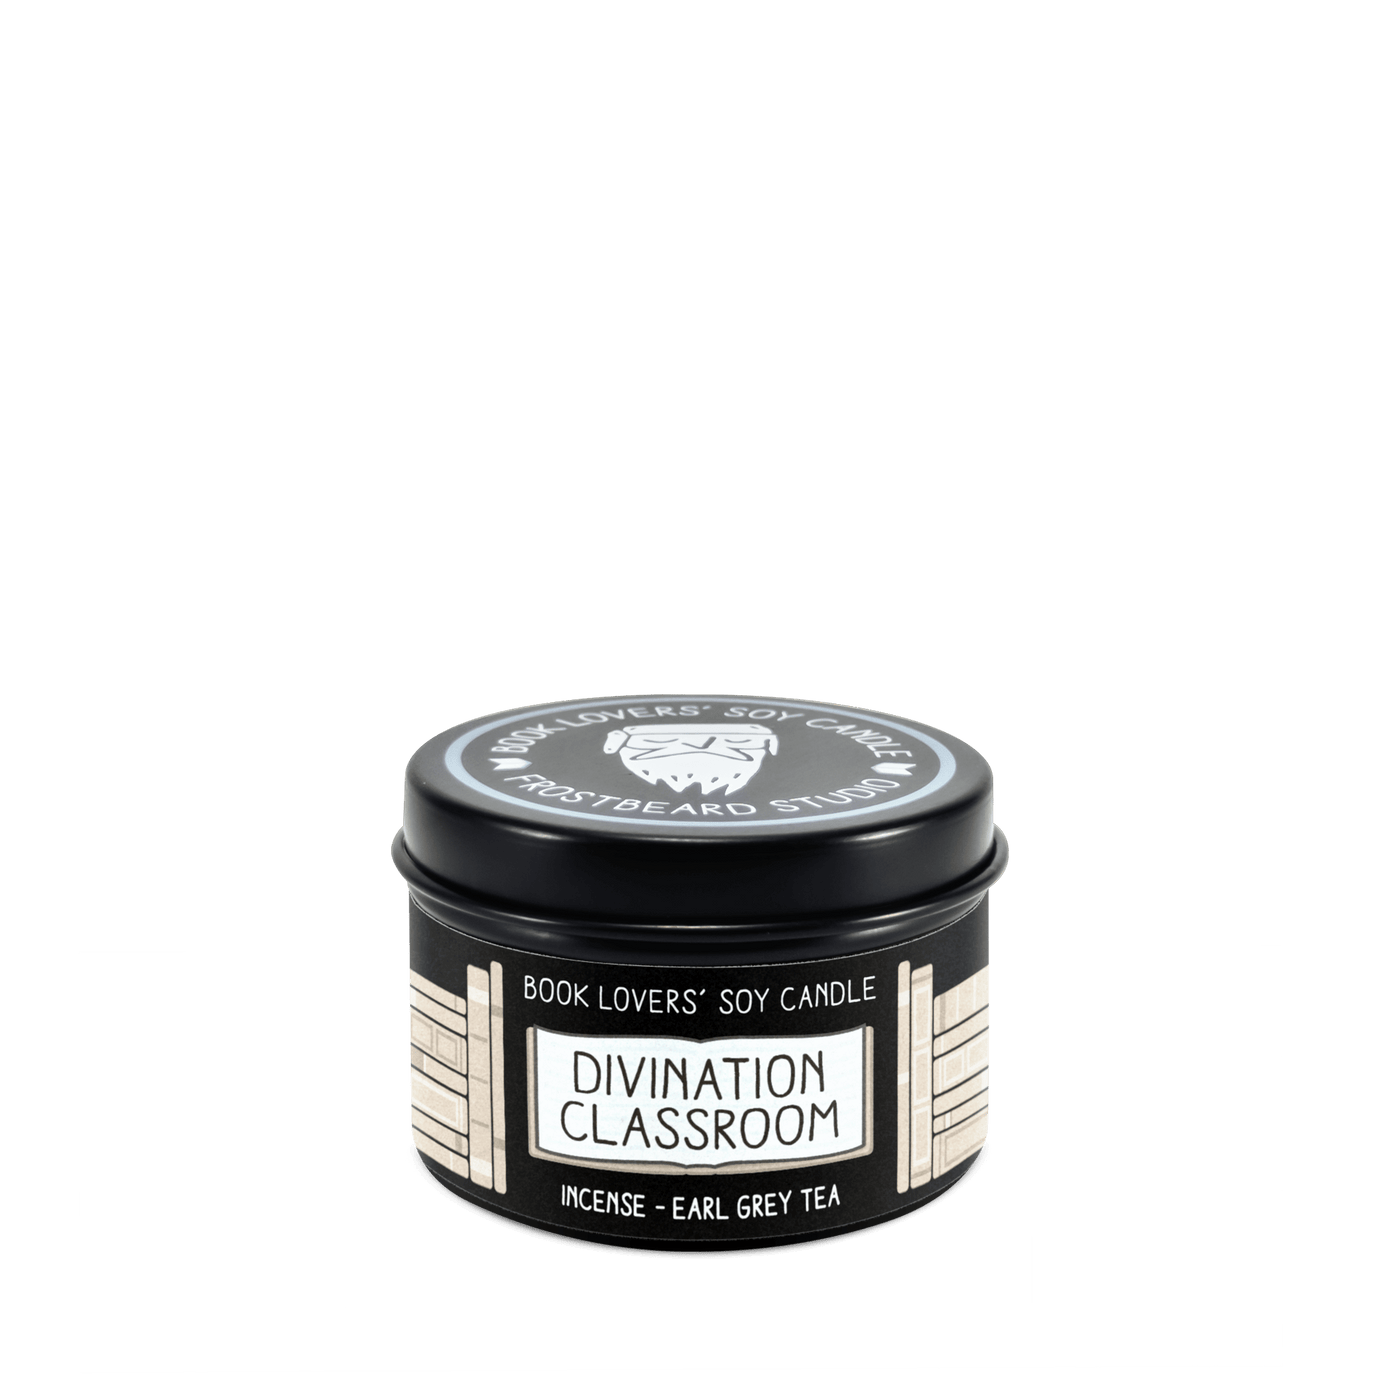 Divination Classroom - 2 oz Tin - Book Lovers' Soy Candle - Frostbeard Studio